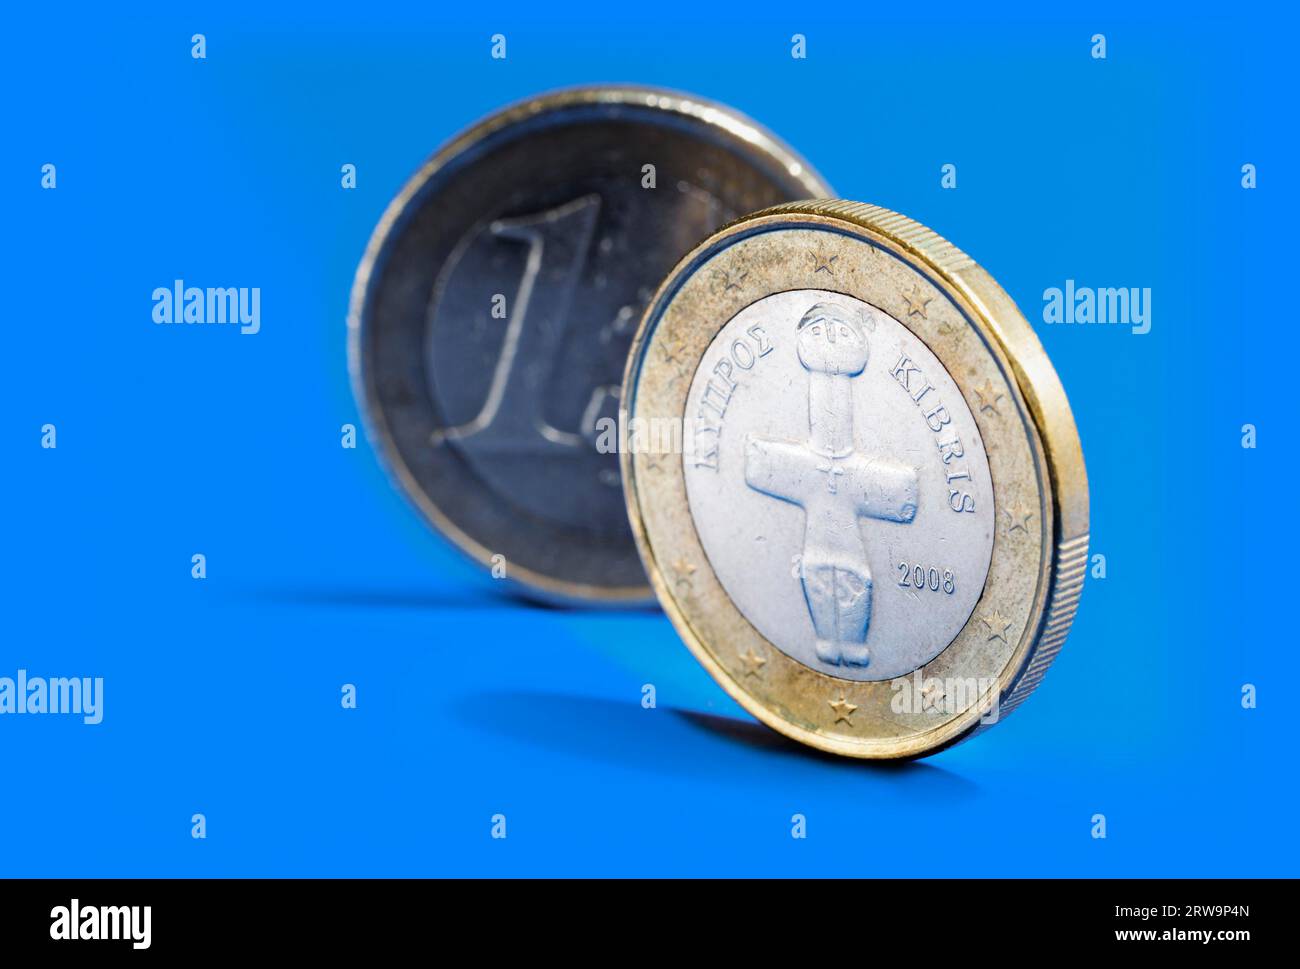 Euro coins from Cyprus on blue background Stock Photo